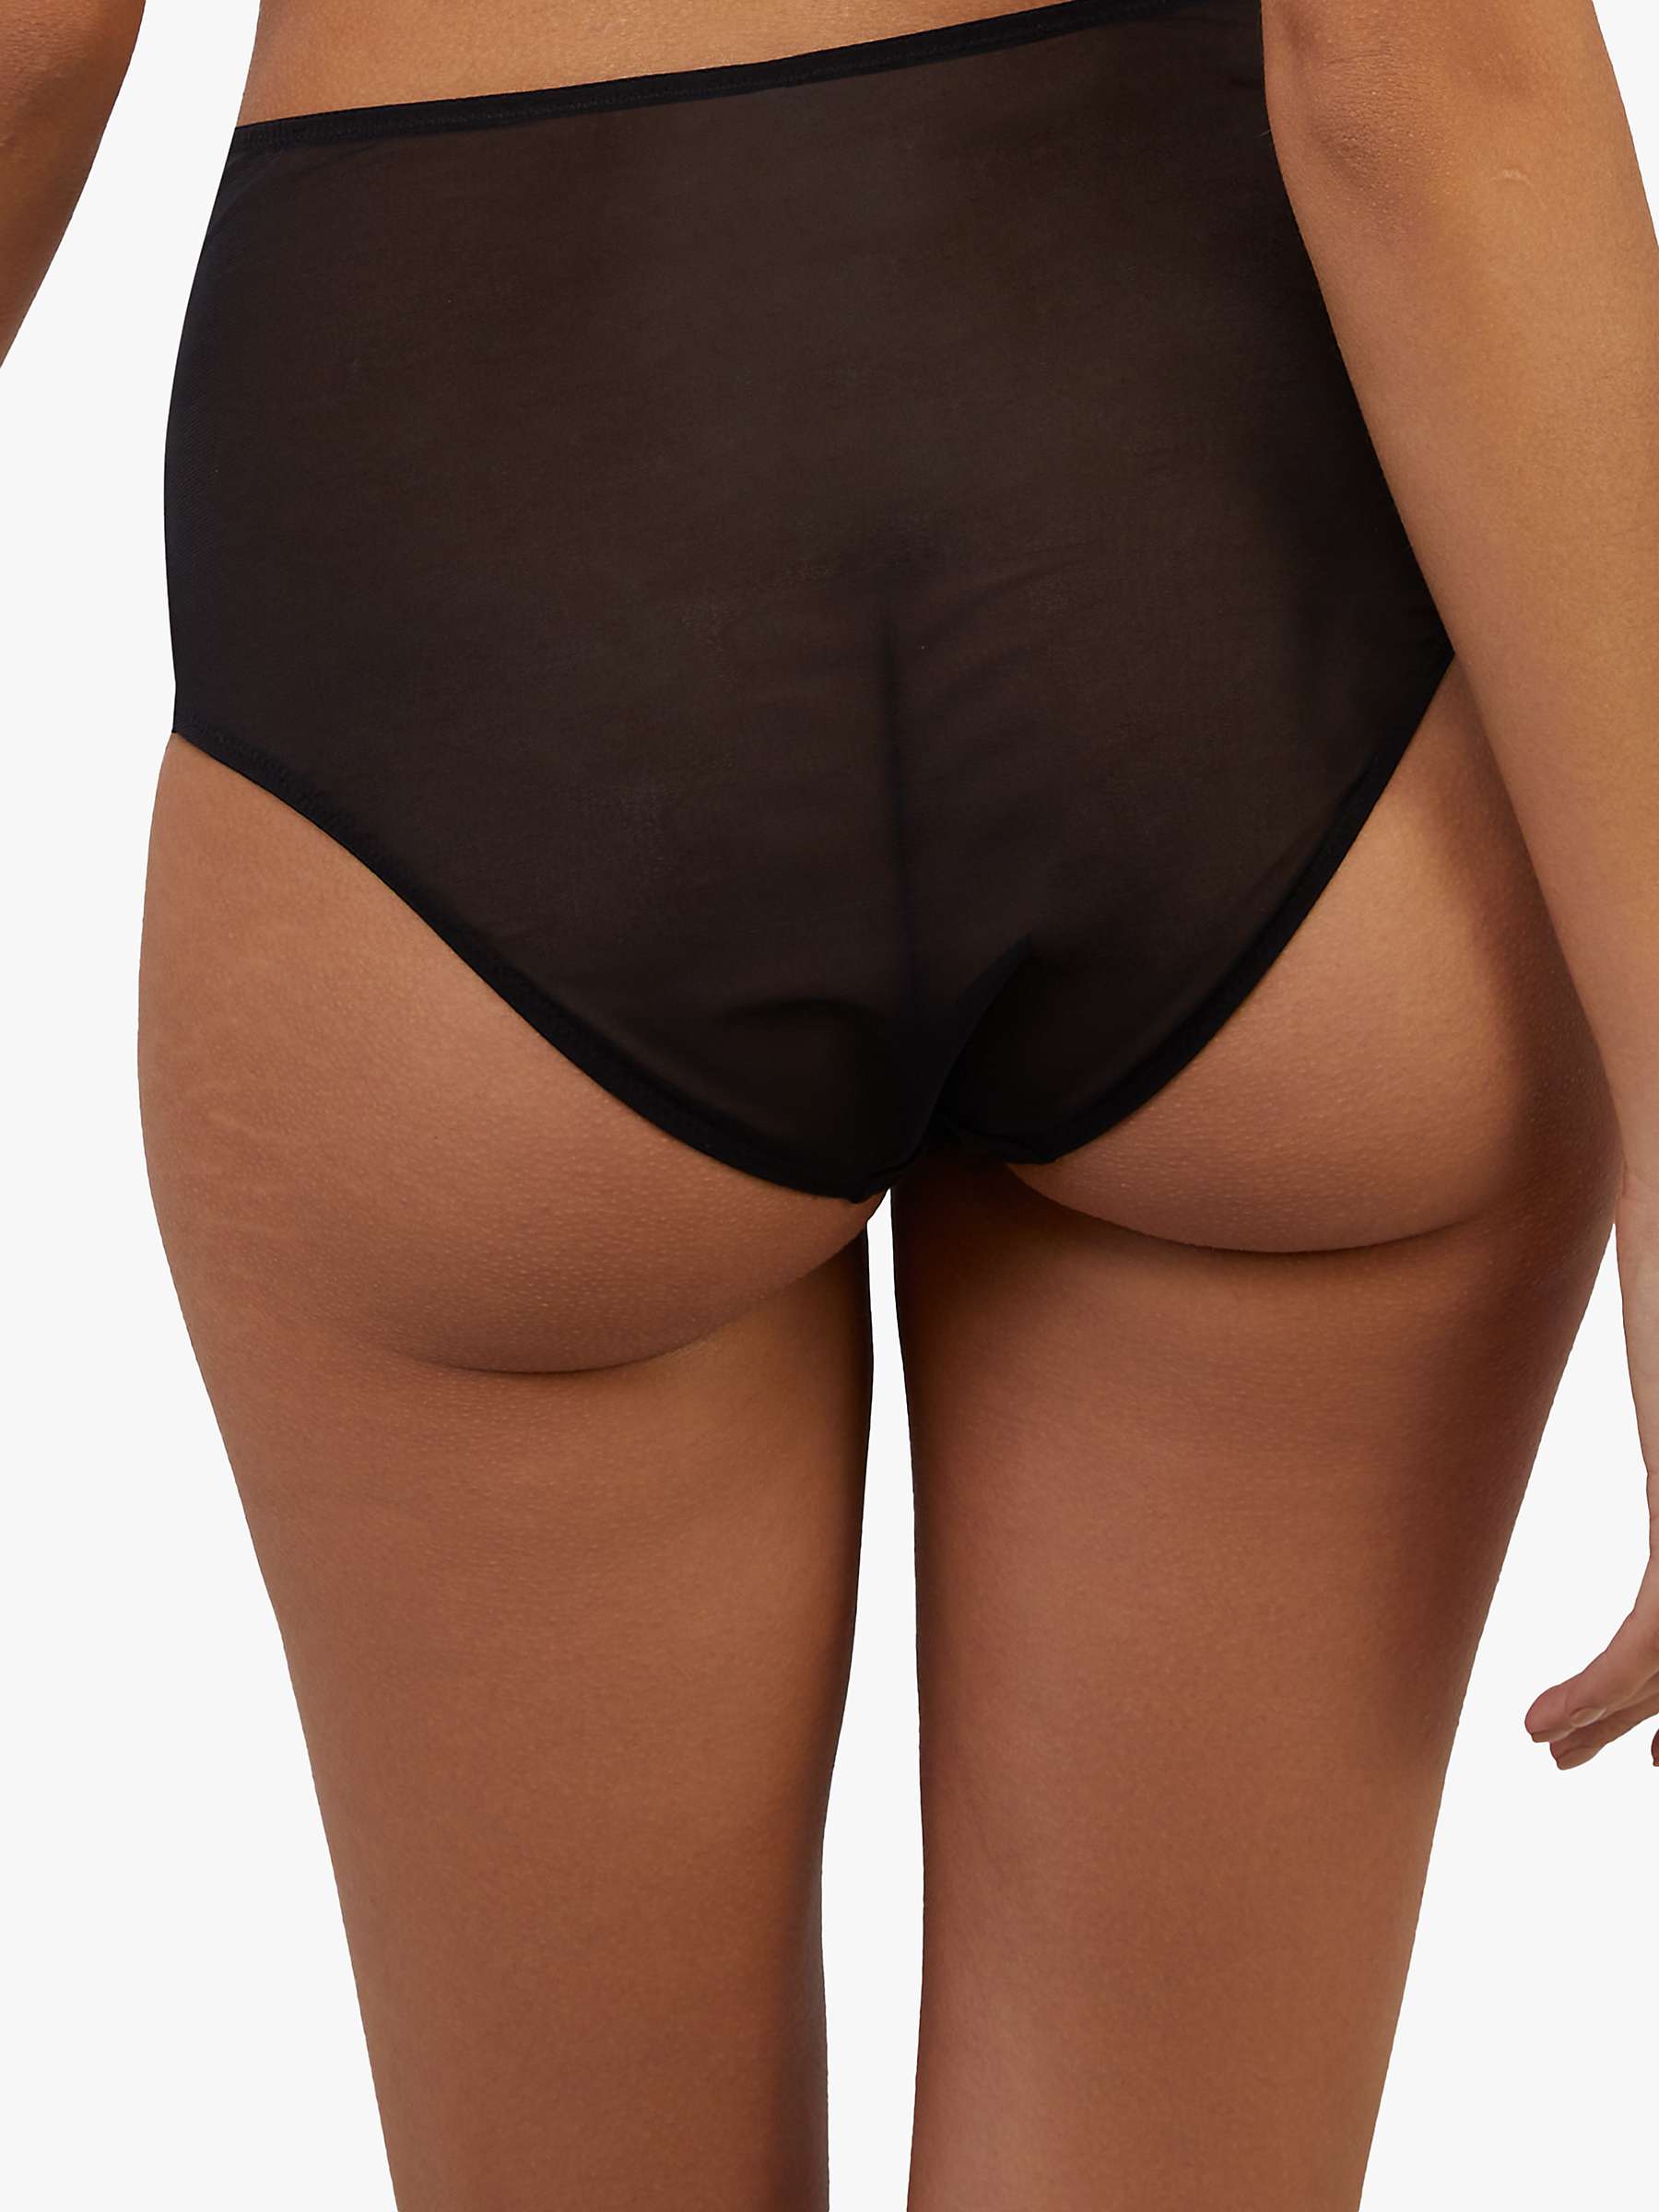 Buy Playful Promises Jessie Whip Embroidery High Waist Knickers, Pink/Black Online at johnlewis.com